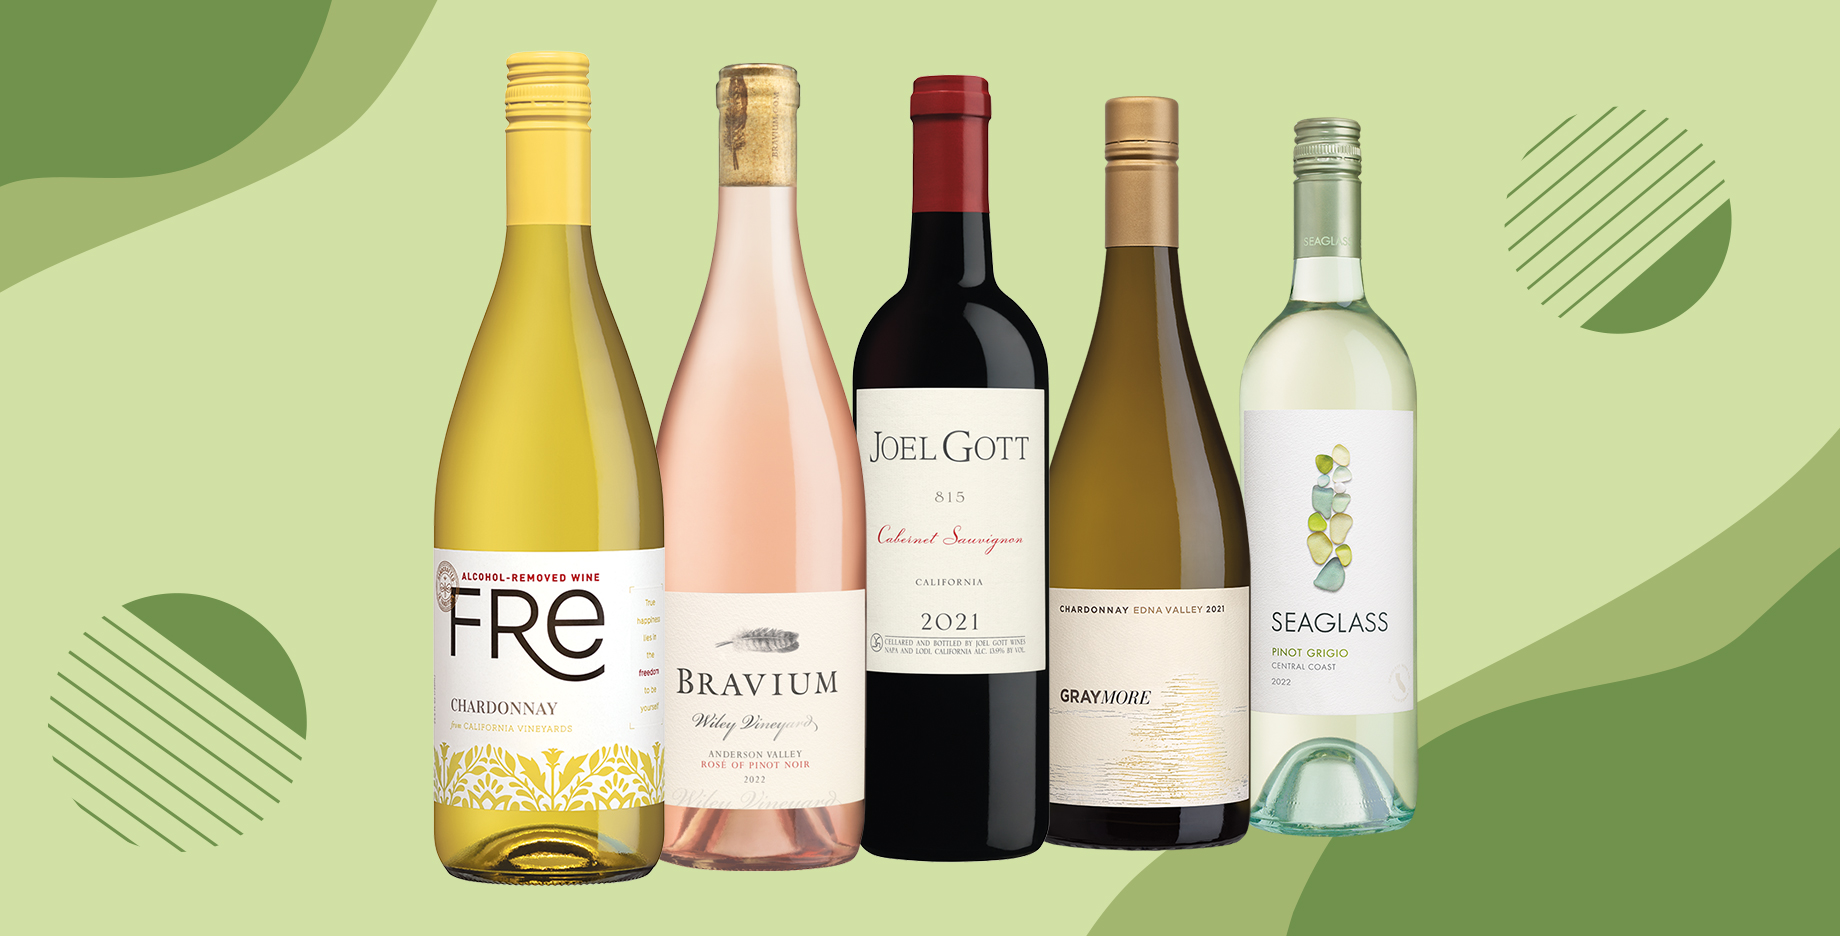 Various bottles of wine from One Stop Wine Shop on a graphic background of green hues